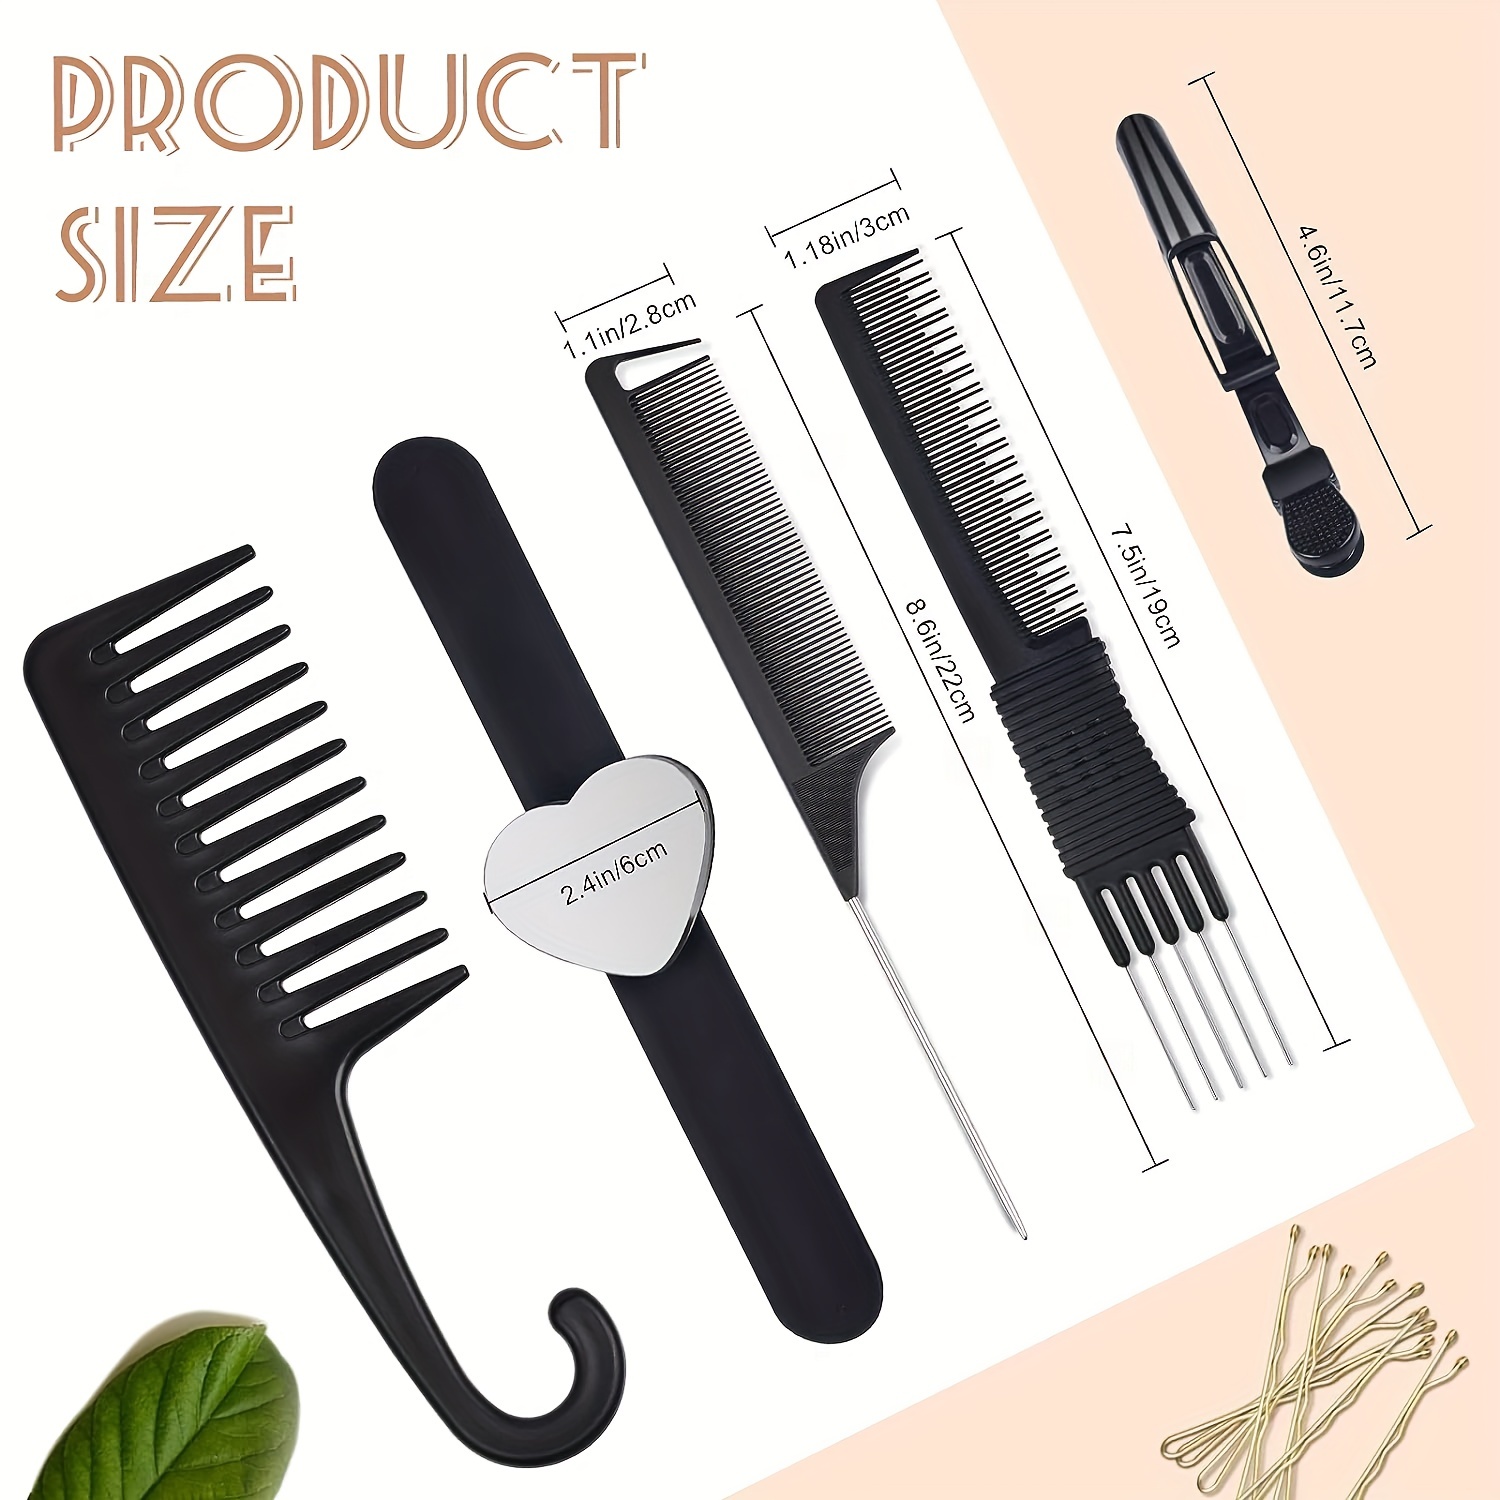 Magnetic Pin Holder Wrist Band, Magnetic Wrist Sewing Pincushion Wristband  For Gel Pin Holder For Stylist Hair Pins Holder With Combs For Braiding Hai